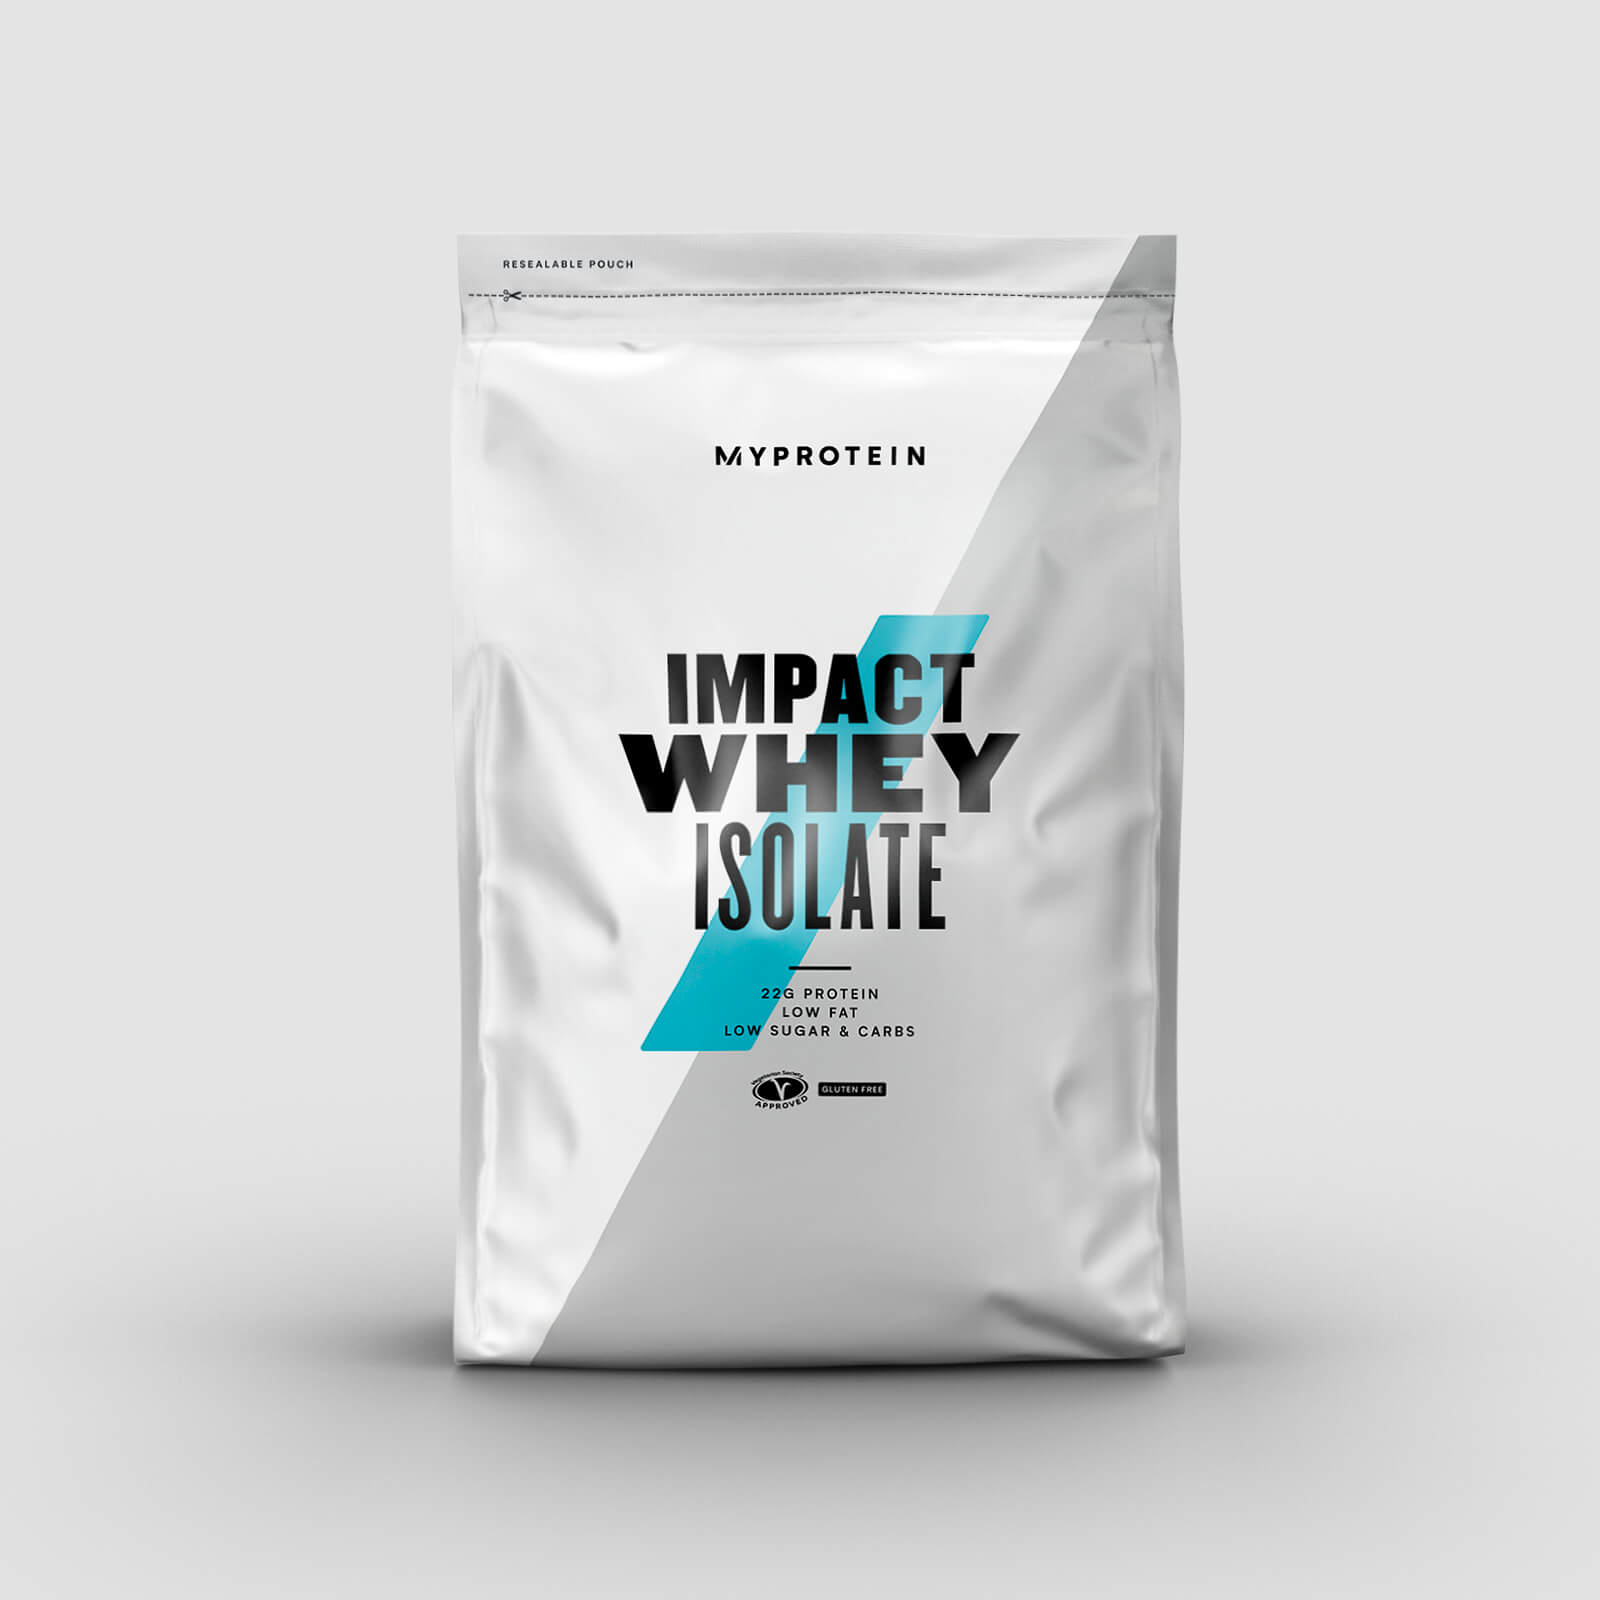 Myprotein Isolatprotein - Impact Whey Isolate - 5kg - Ny - Natural Chocolate